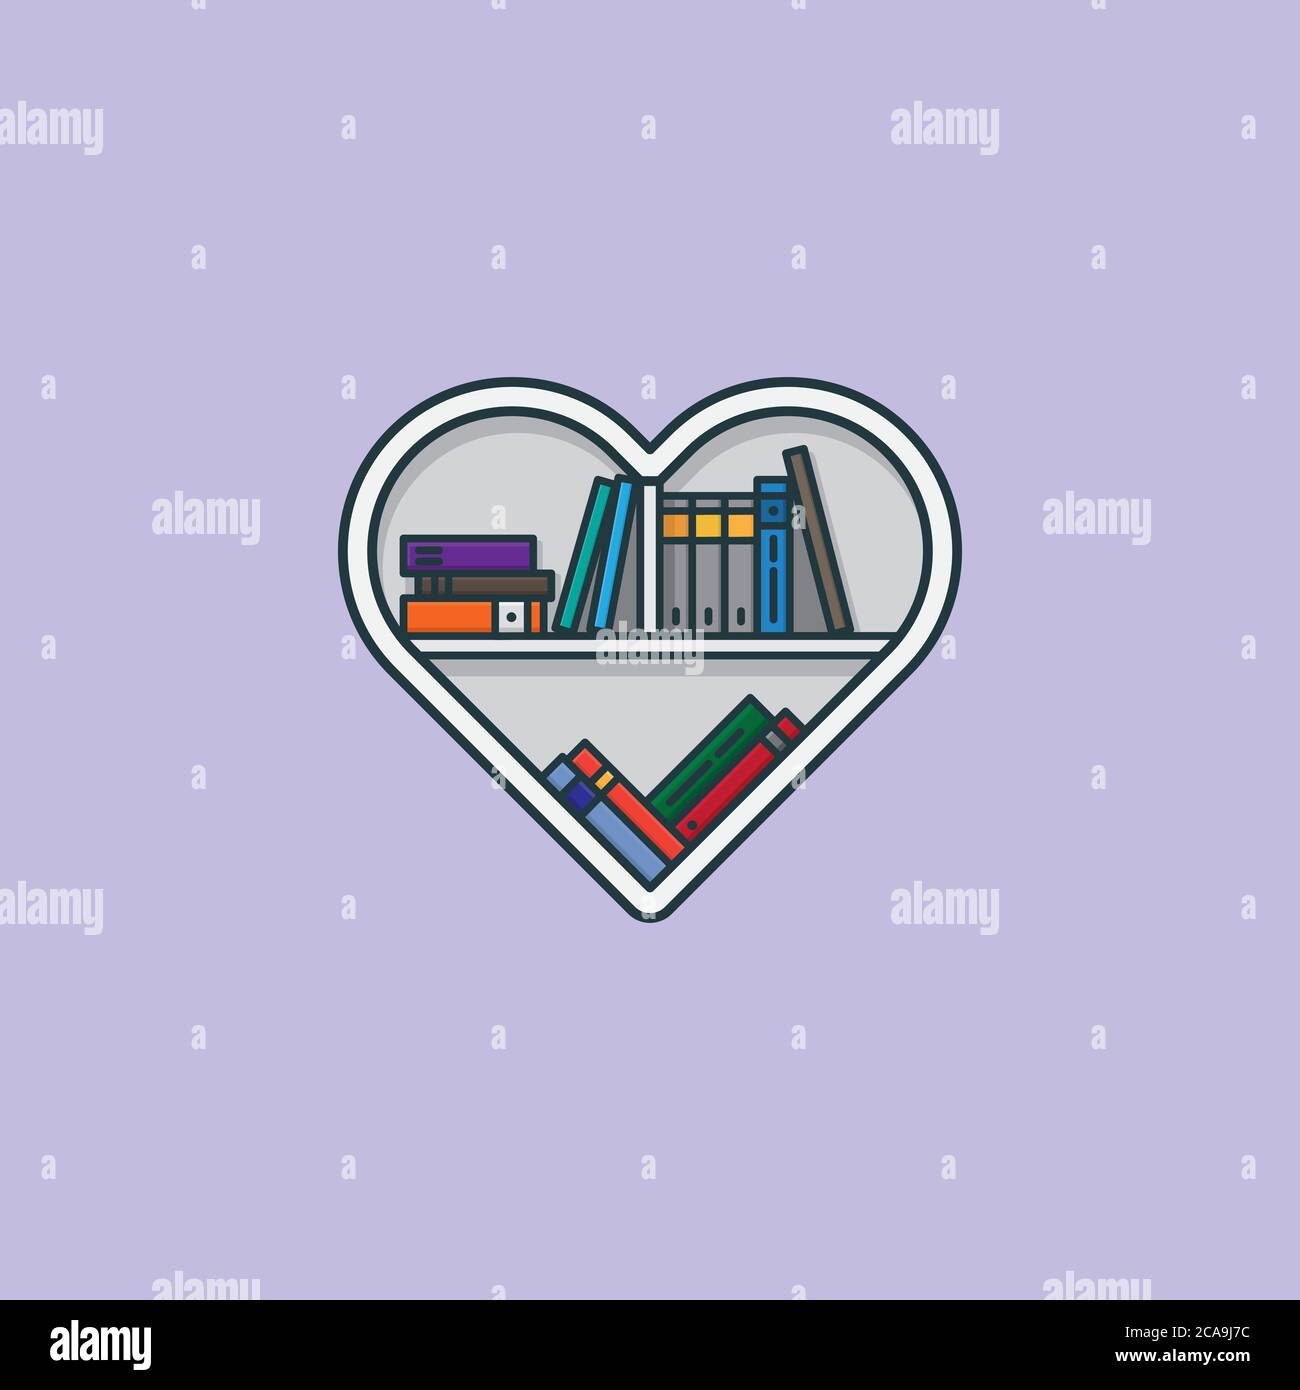 Heart shaped bookshelf with various books vector illustration for Book Lovers Day on August 9th. Literature appreciation symbol. Stock Vector